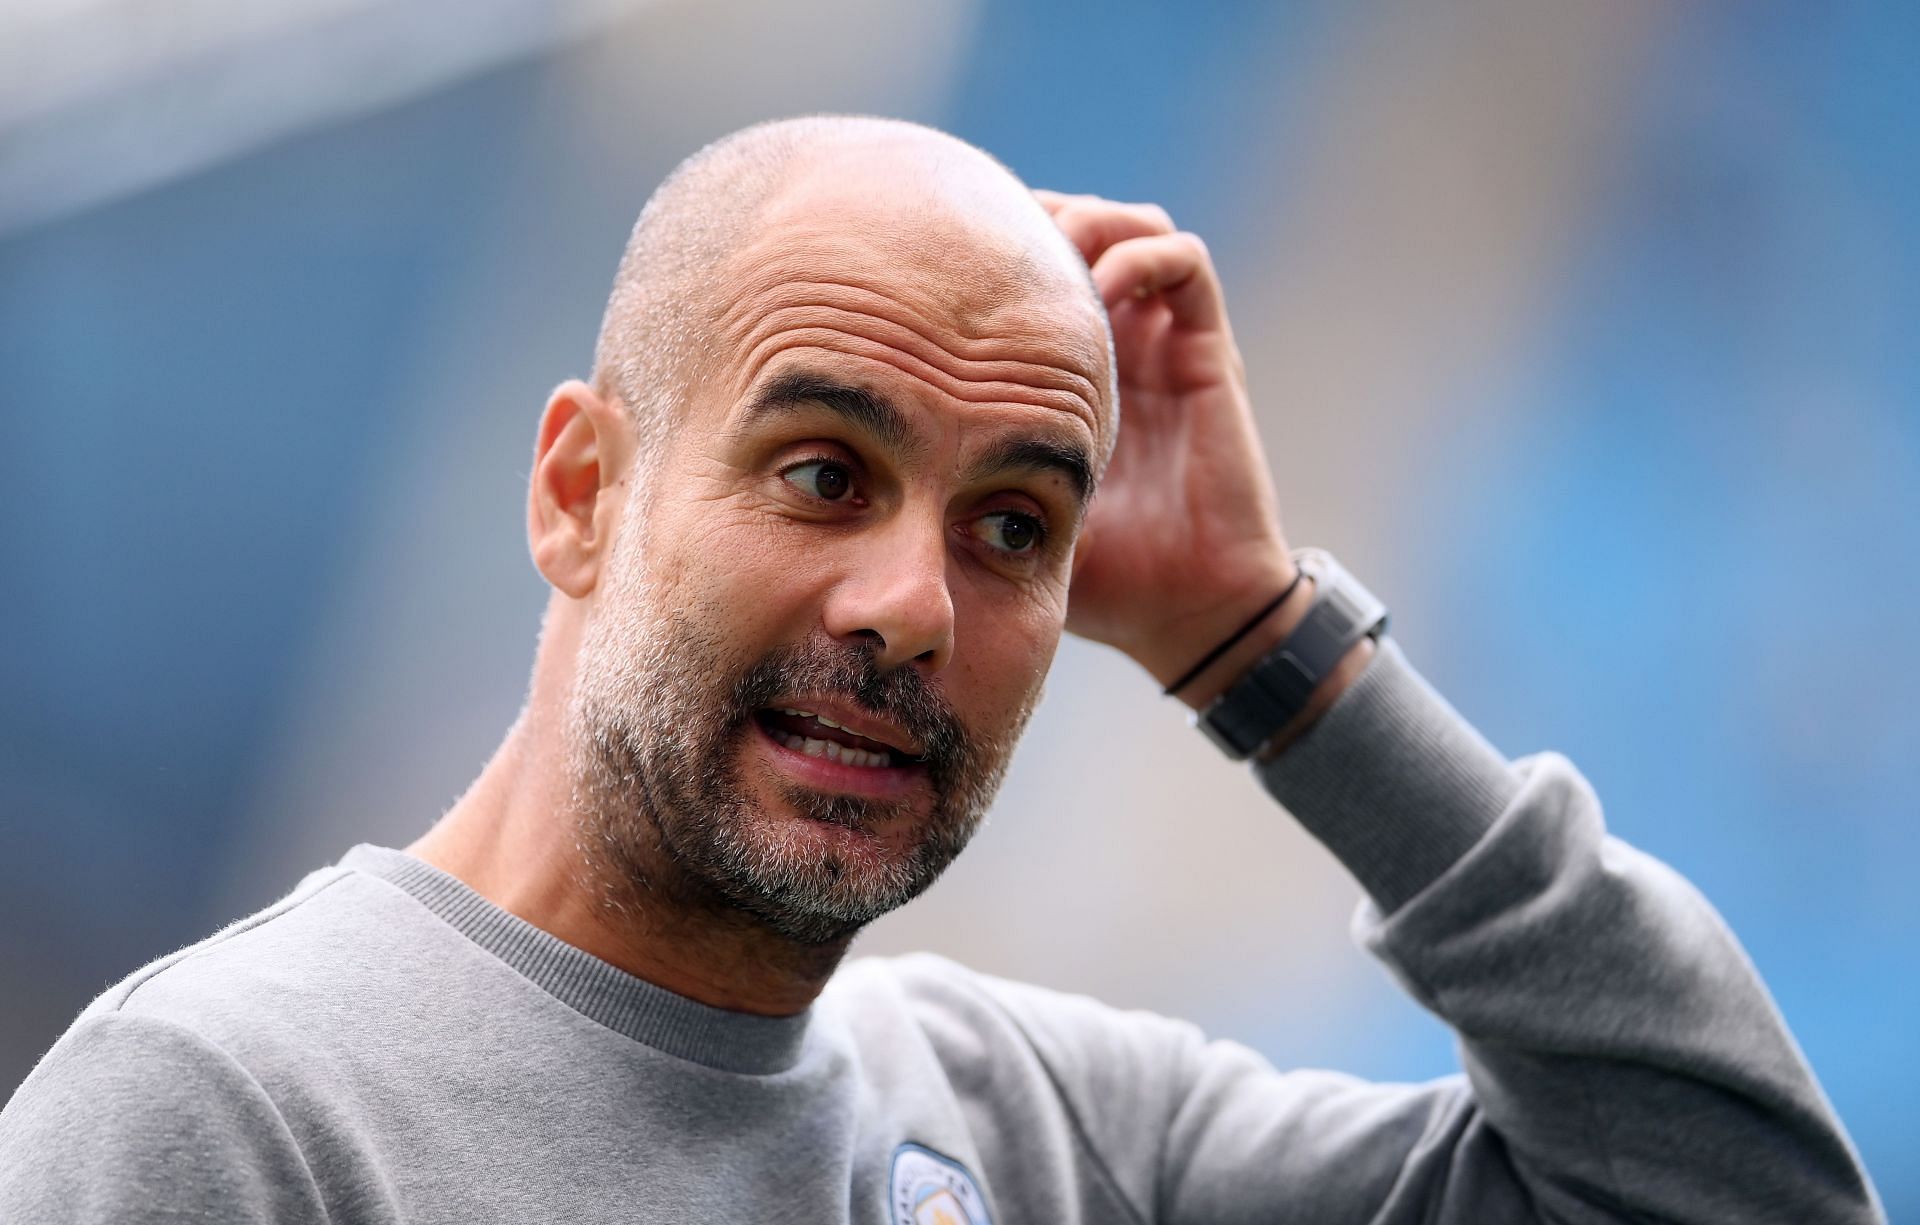 Pep Guardiola is one of the most successful managers in the 21st century.